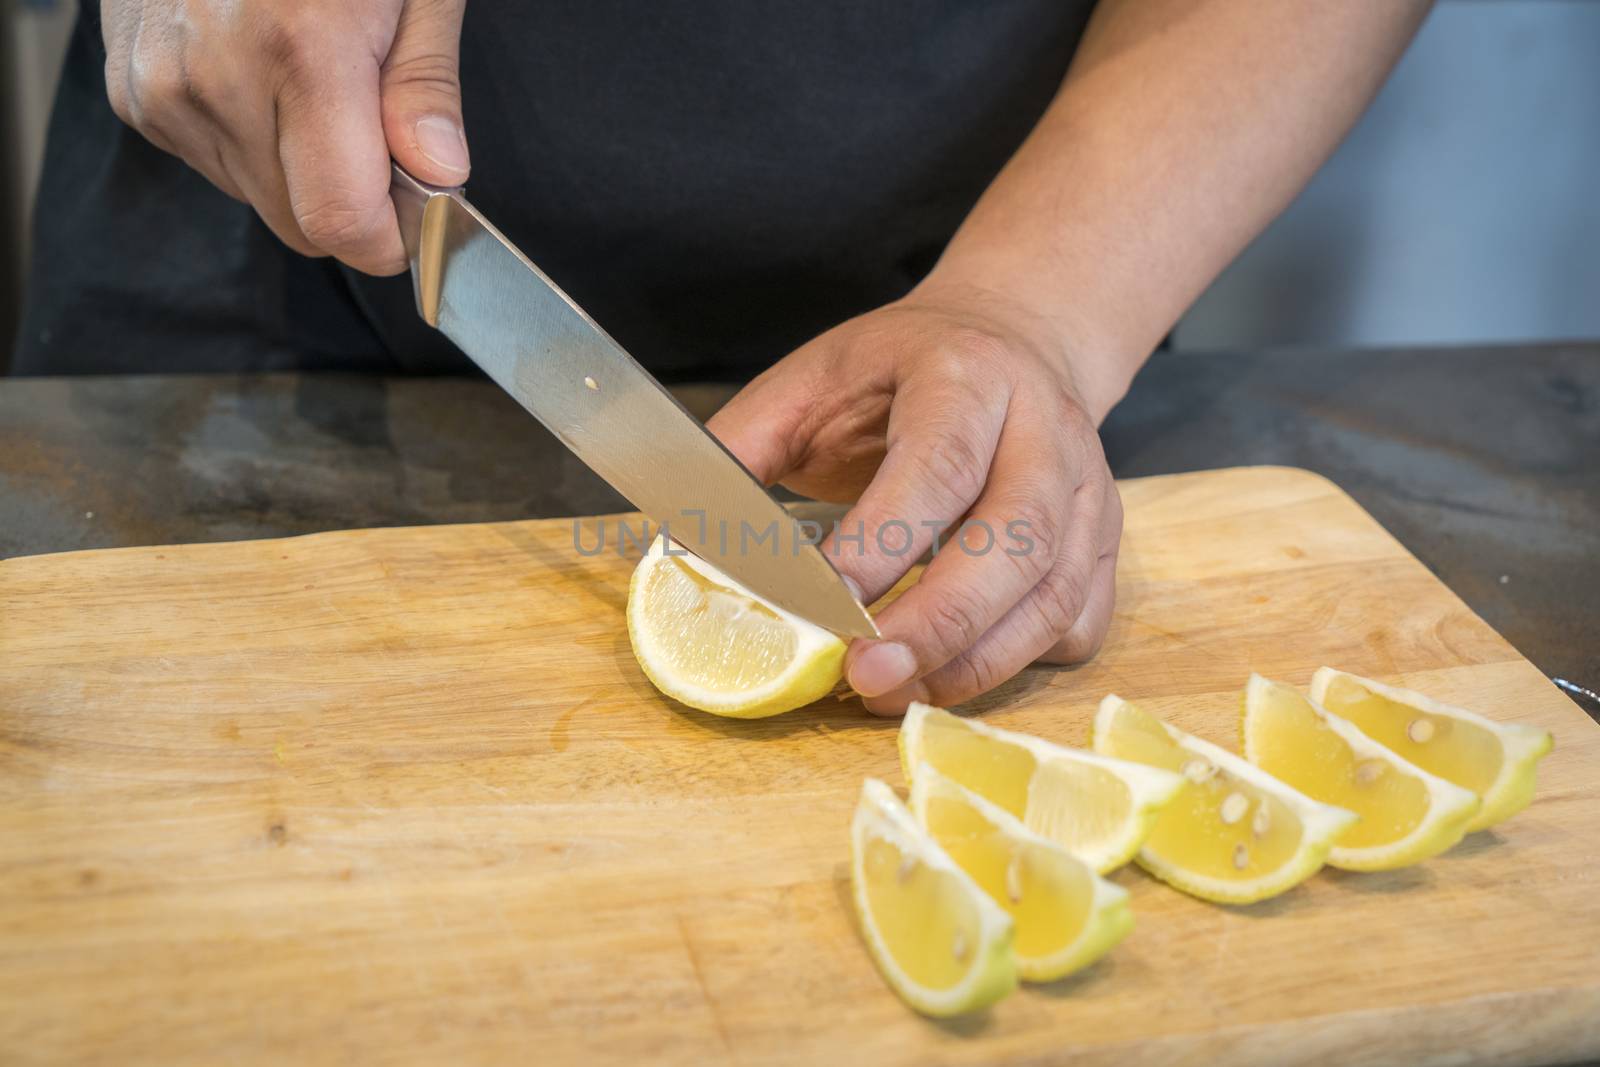 Chef slicing Lemon on wooden cutting board.